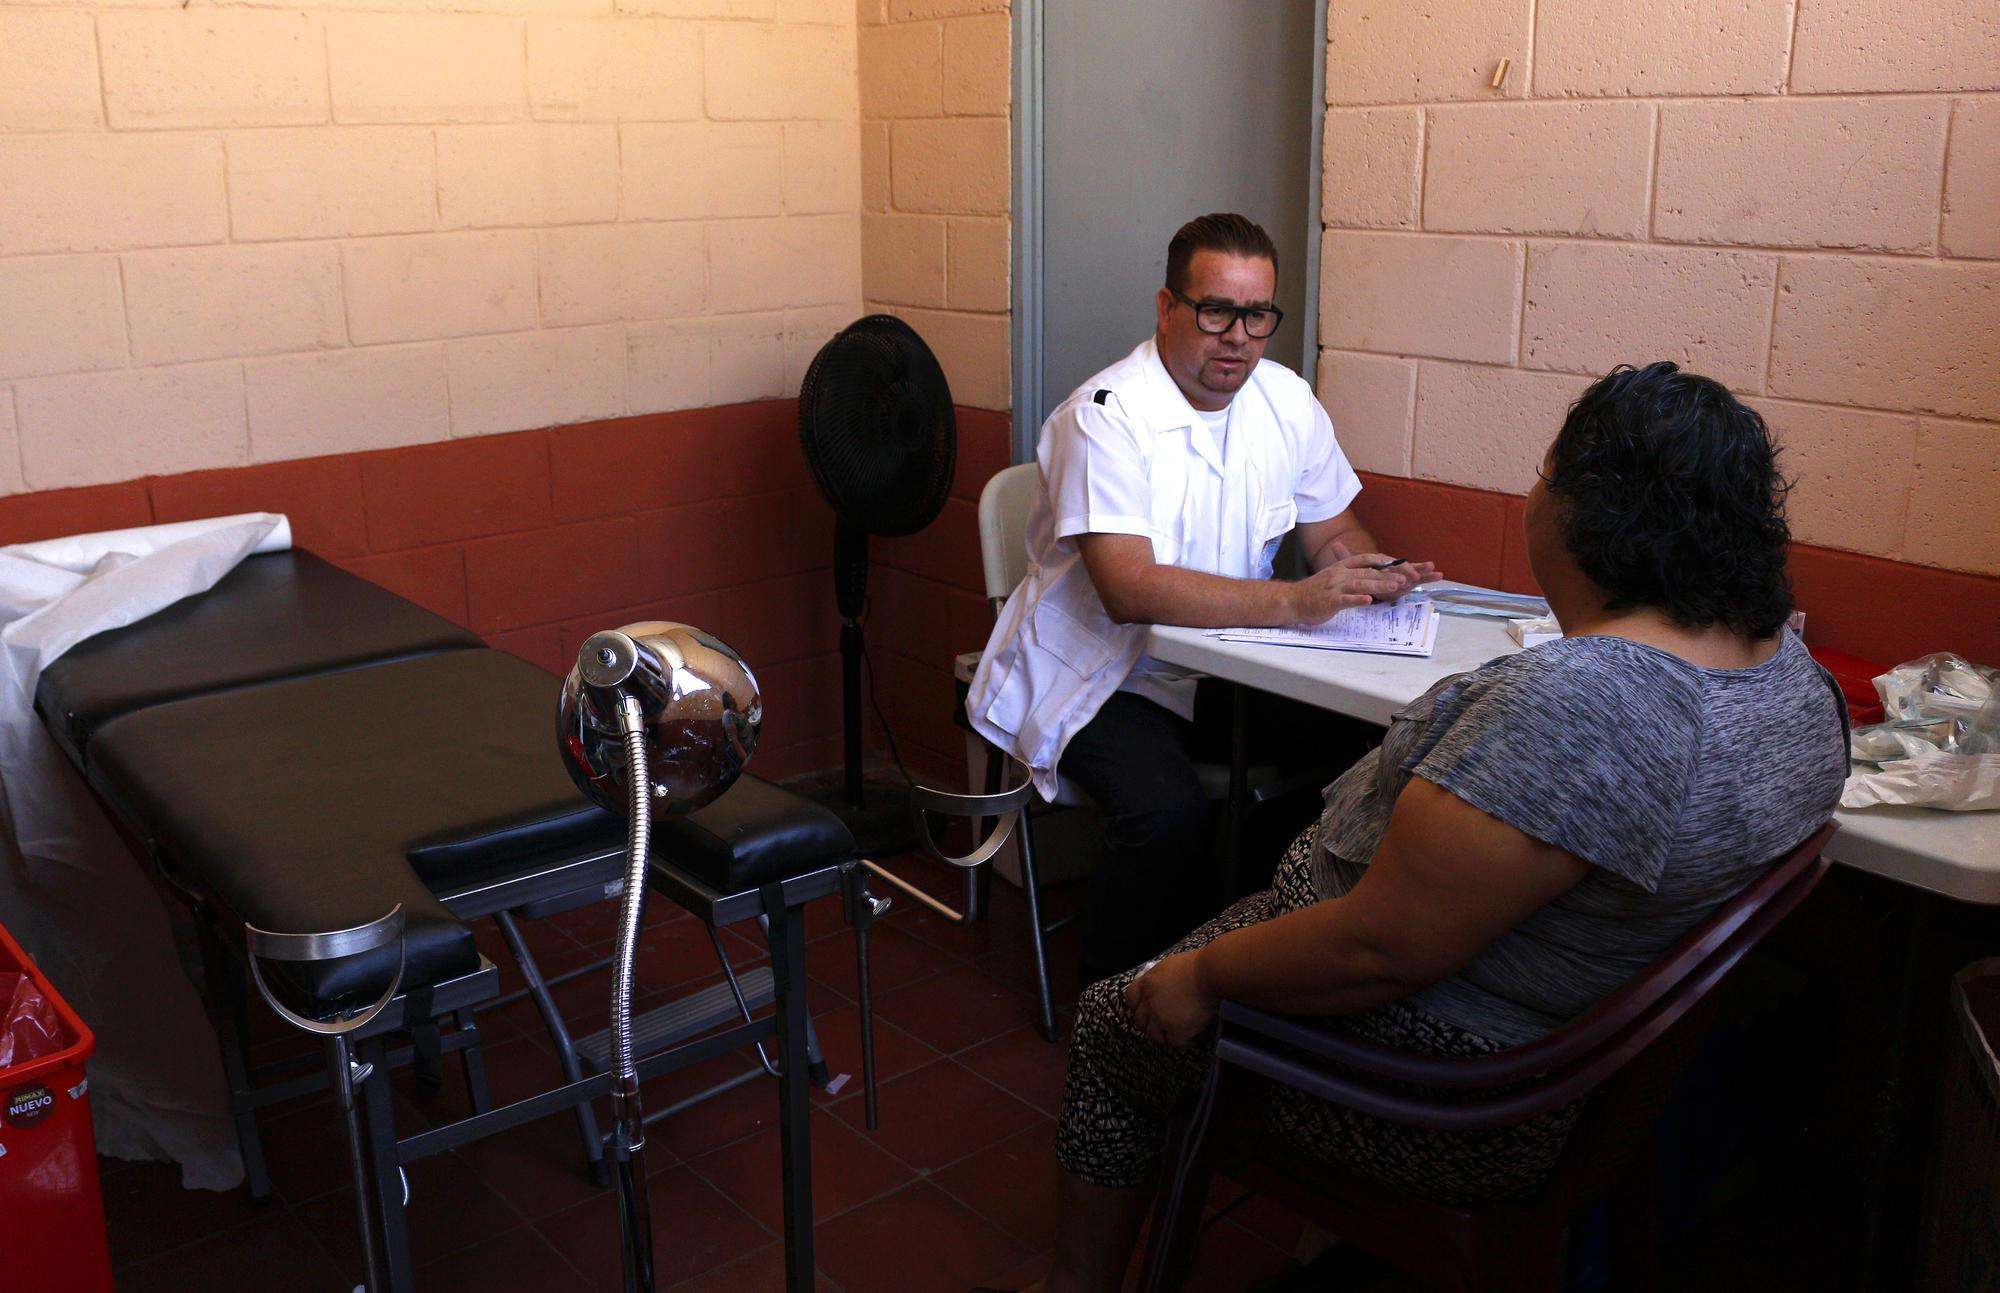 MSF PRESENCE IN RED ZONES OF SAN SALVADOR ALLOWS HEALTH OFFICIALS TO RESTART ACTIVITIES